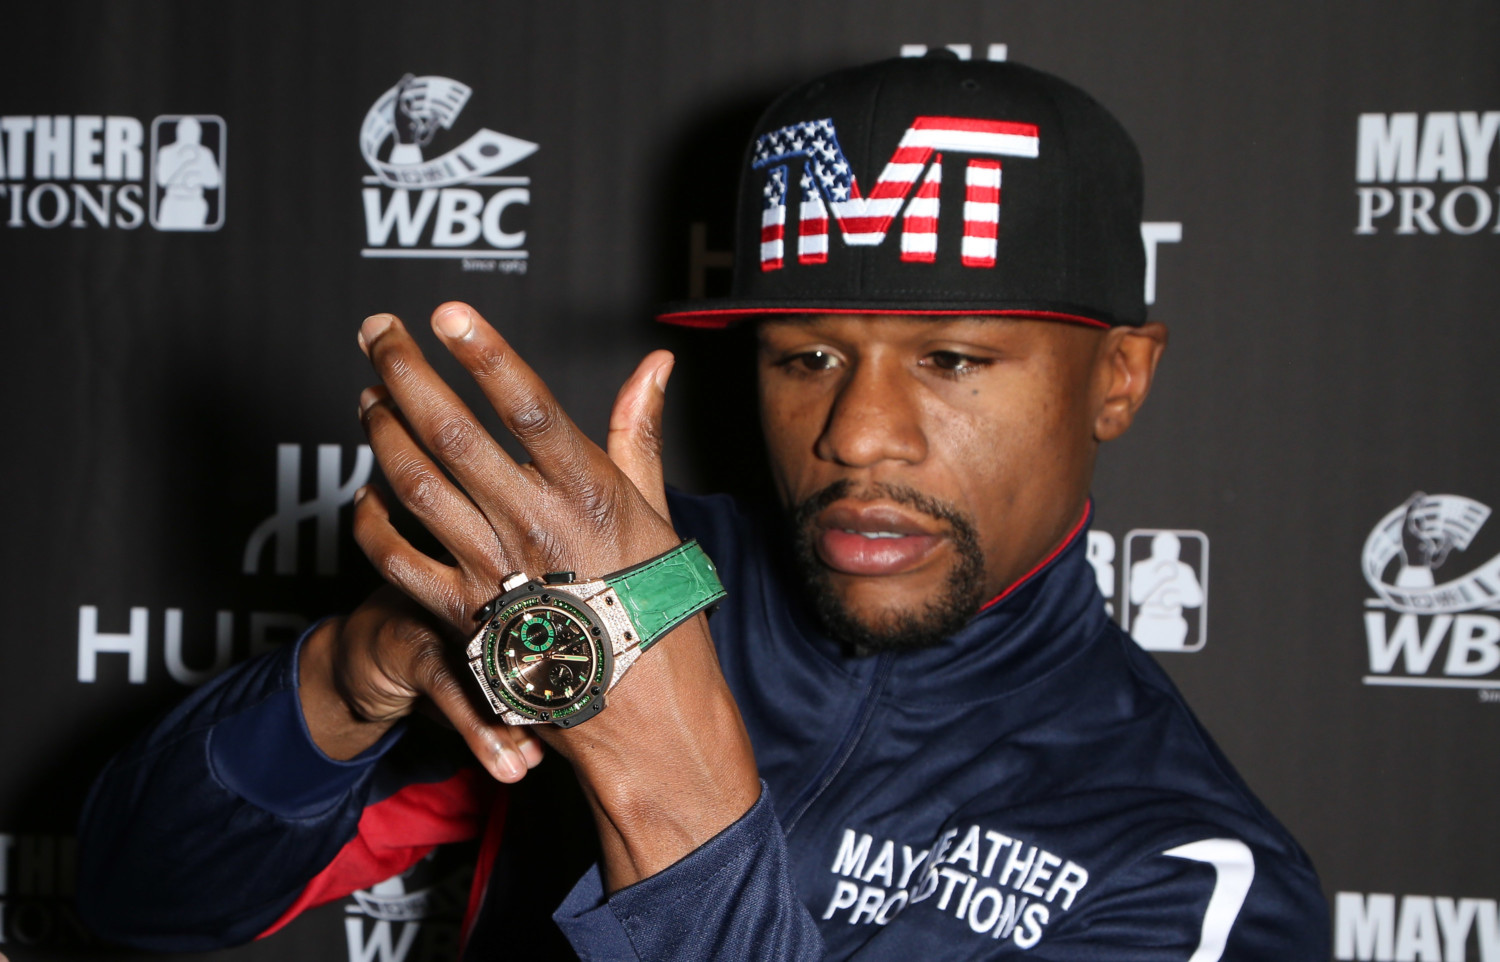 The story behind Floyd Mayweather's opulent fight-night look